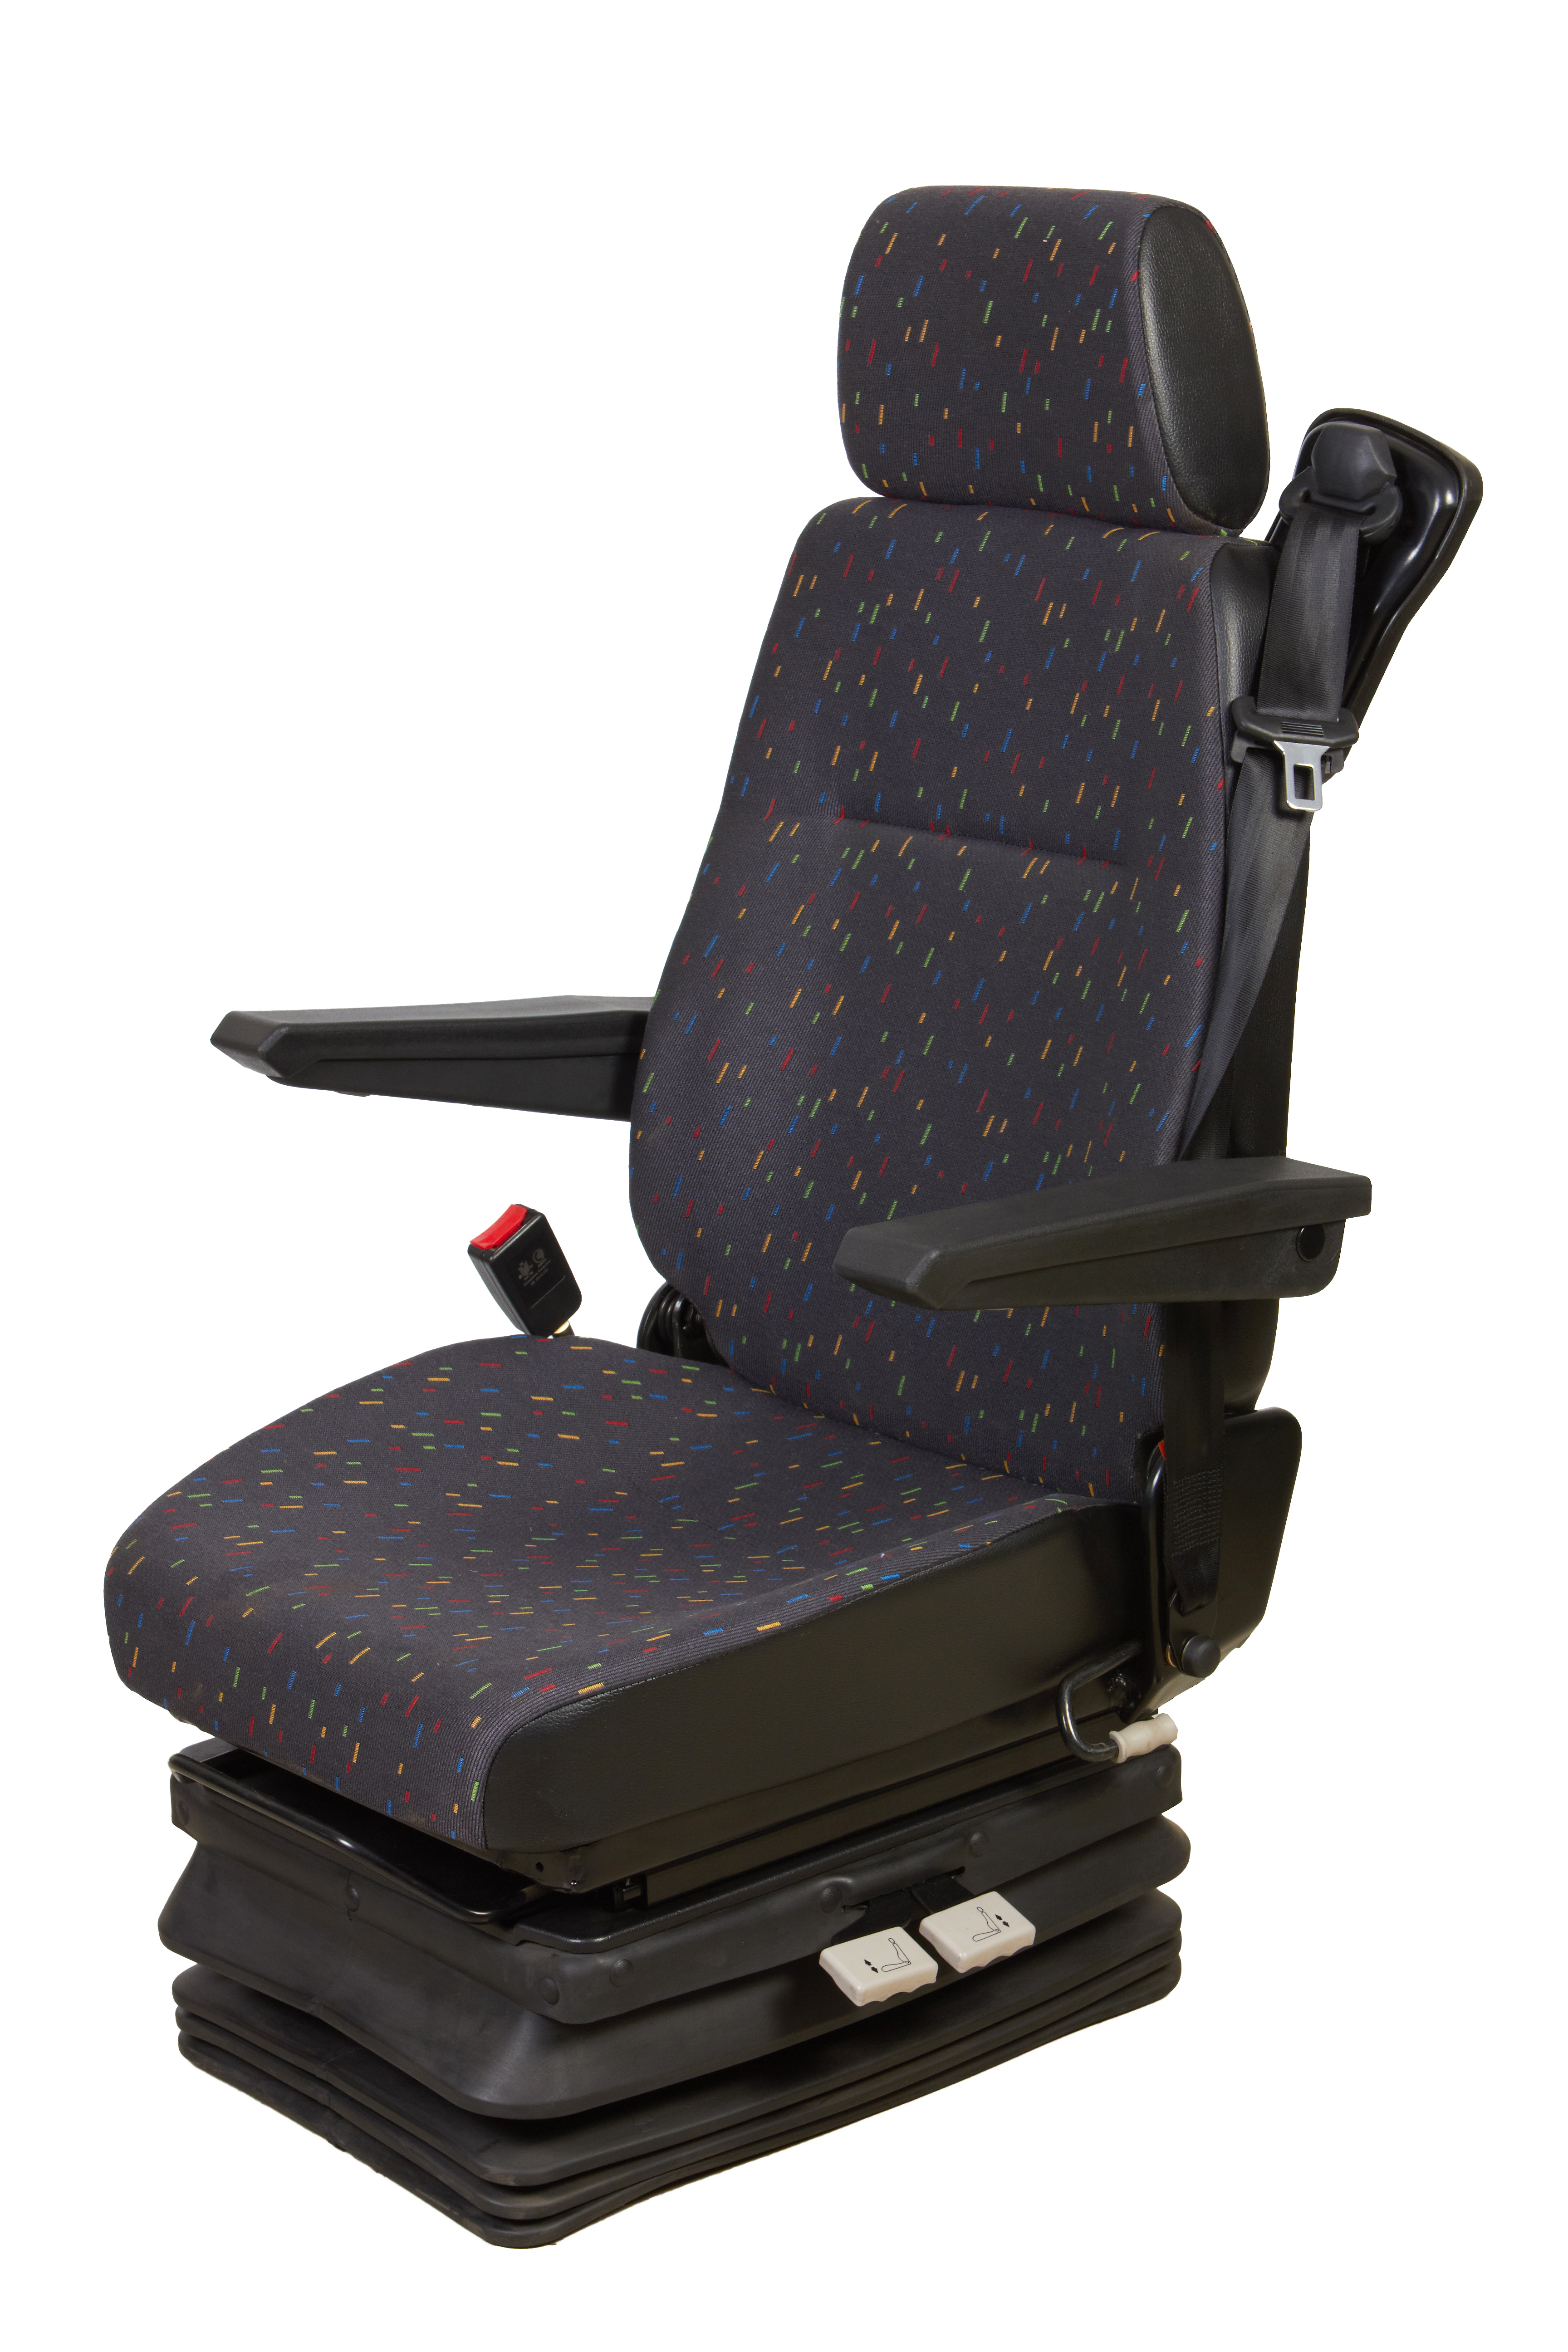 S45 Driver Operator Seat For Trucks, Tractors And Special Machinery